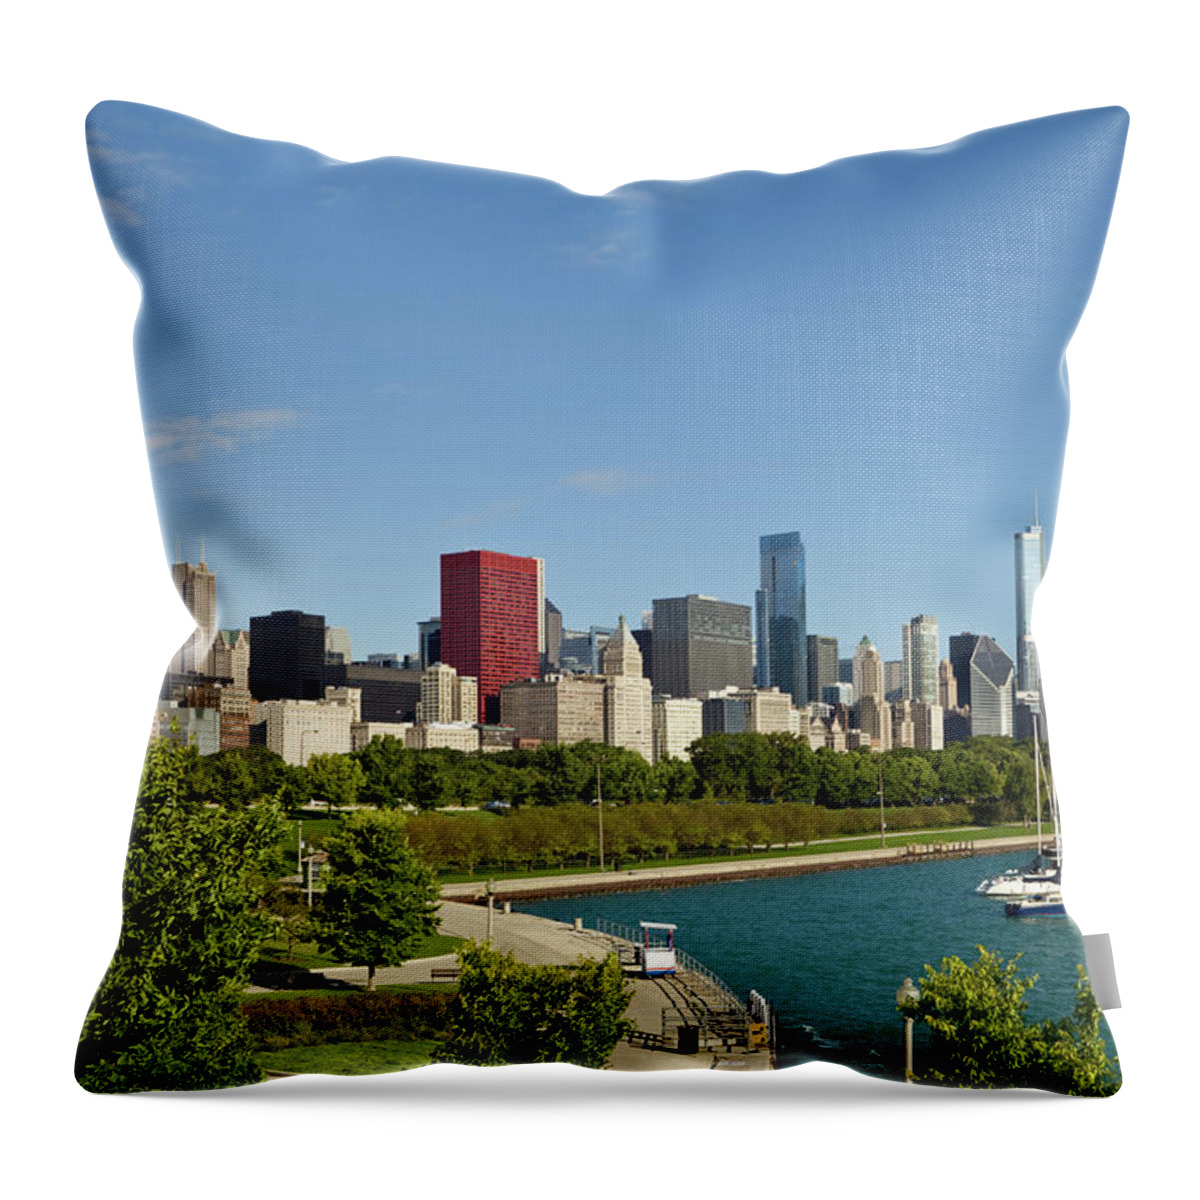 Lake Michigan Throw Pillow featuring the photograph Chicago Skyline On A Sunny Day by Kubrak78